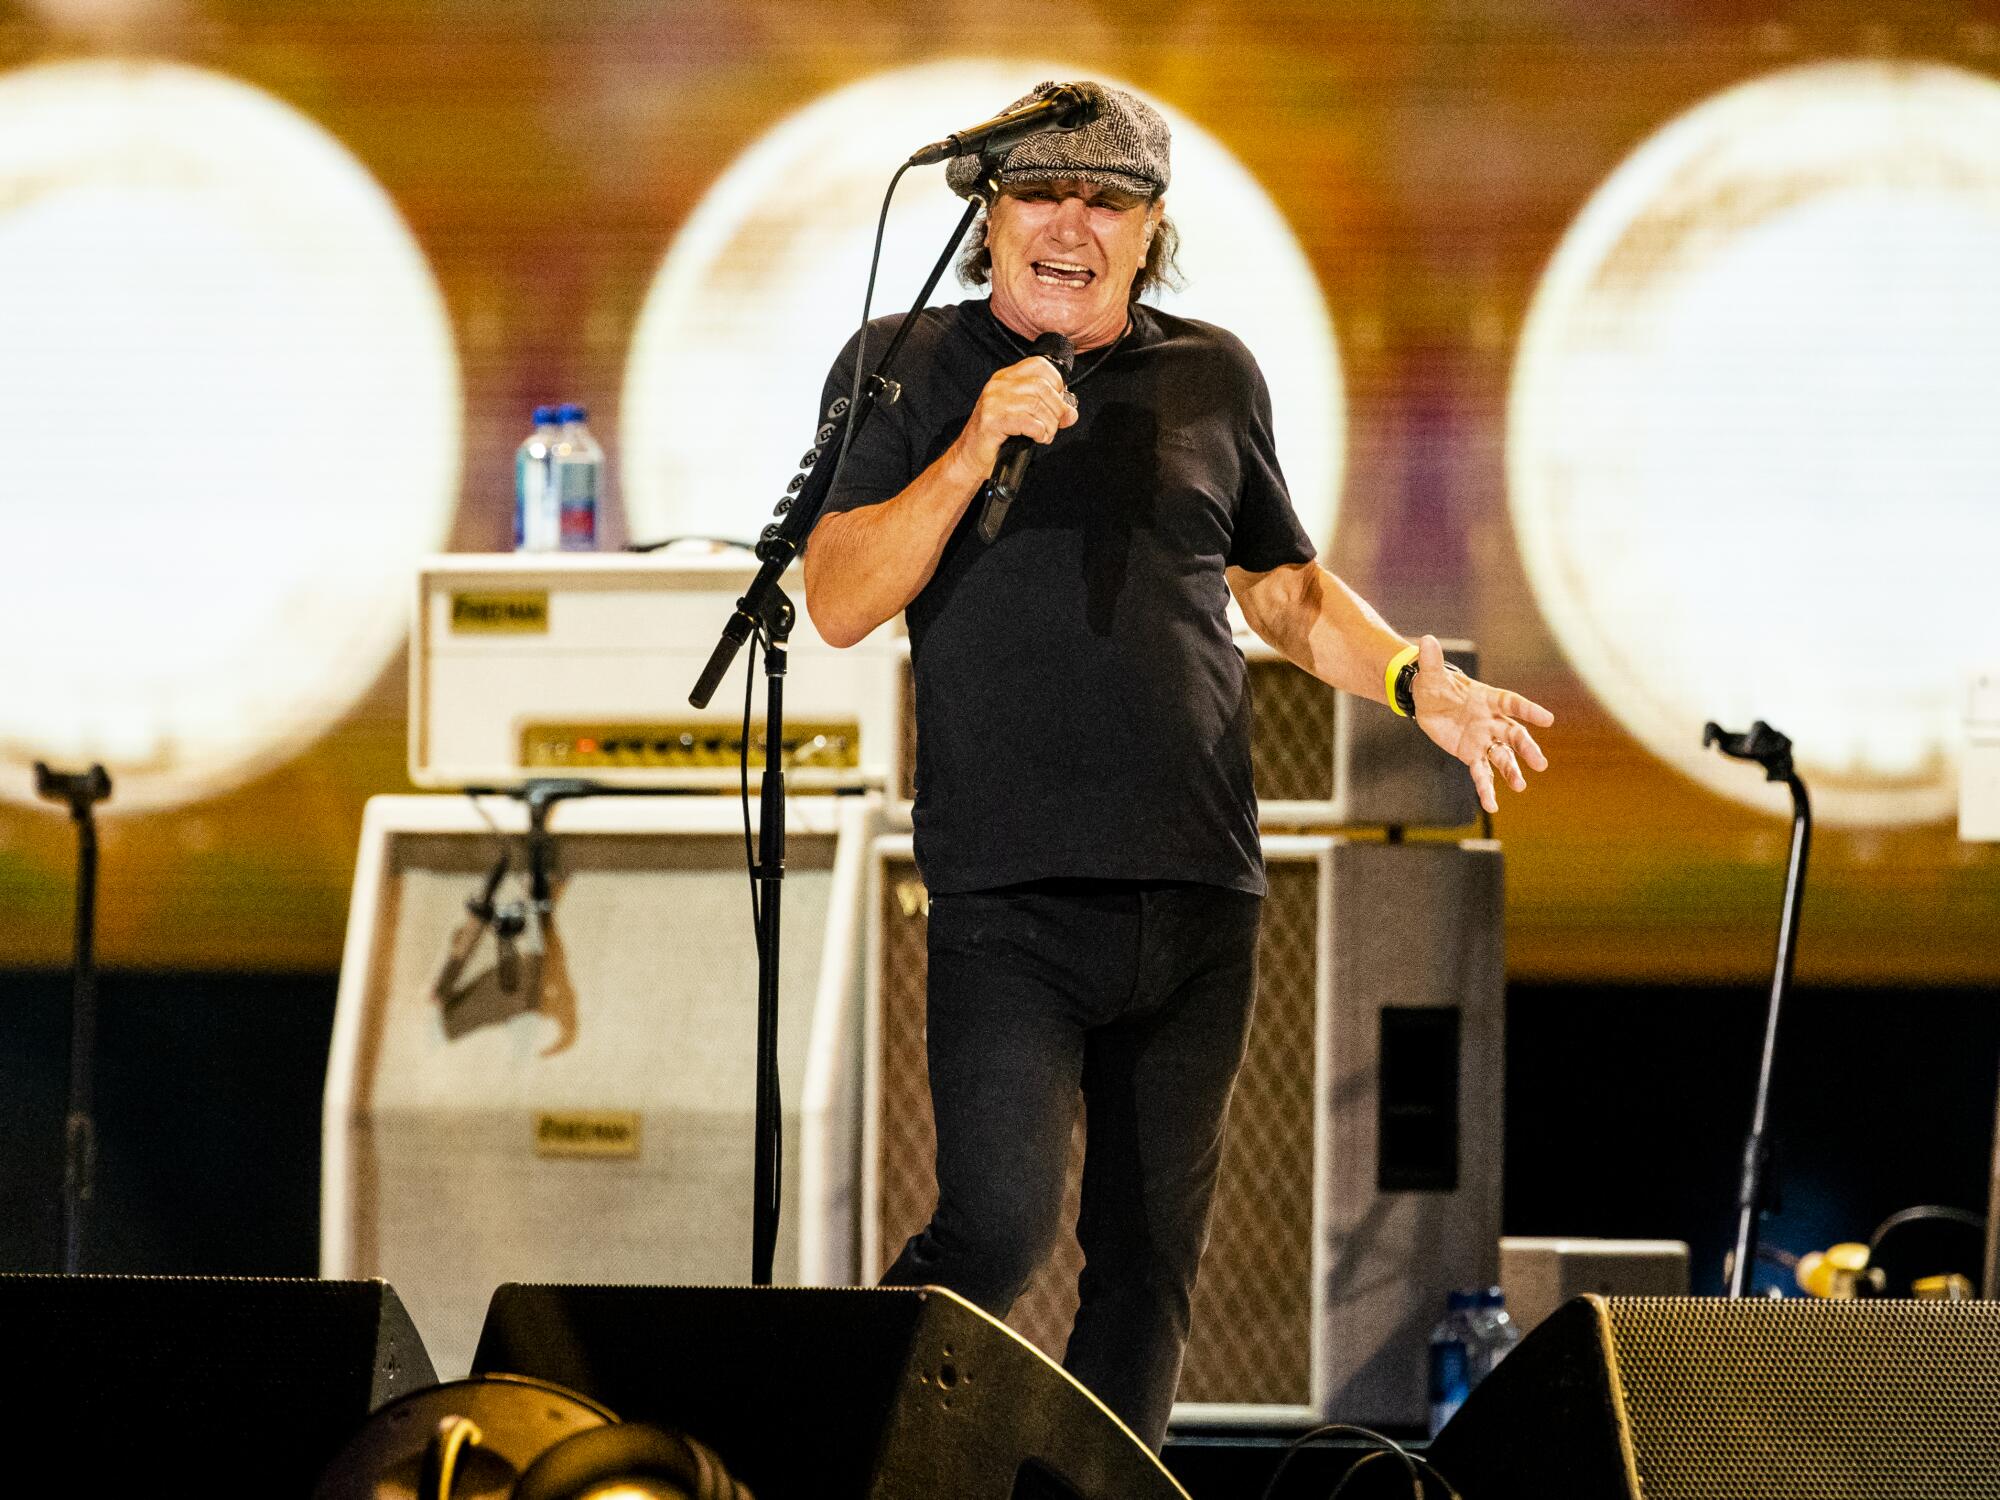 Brian Johnson sings at the Vax Live concert